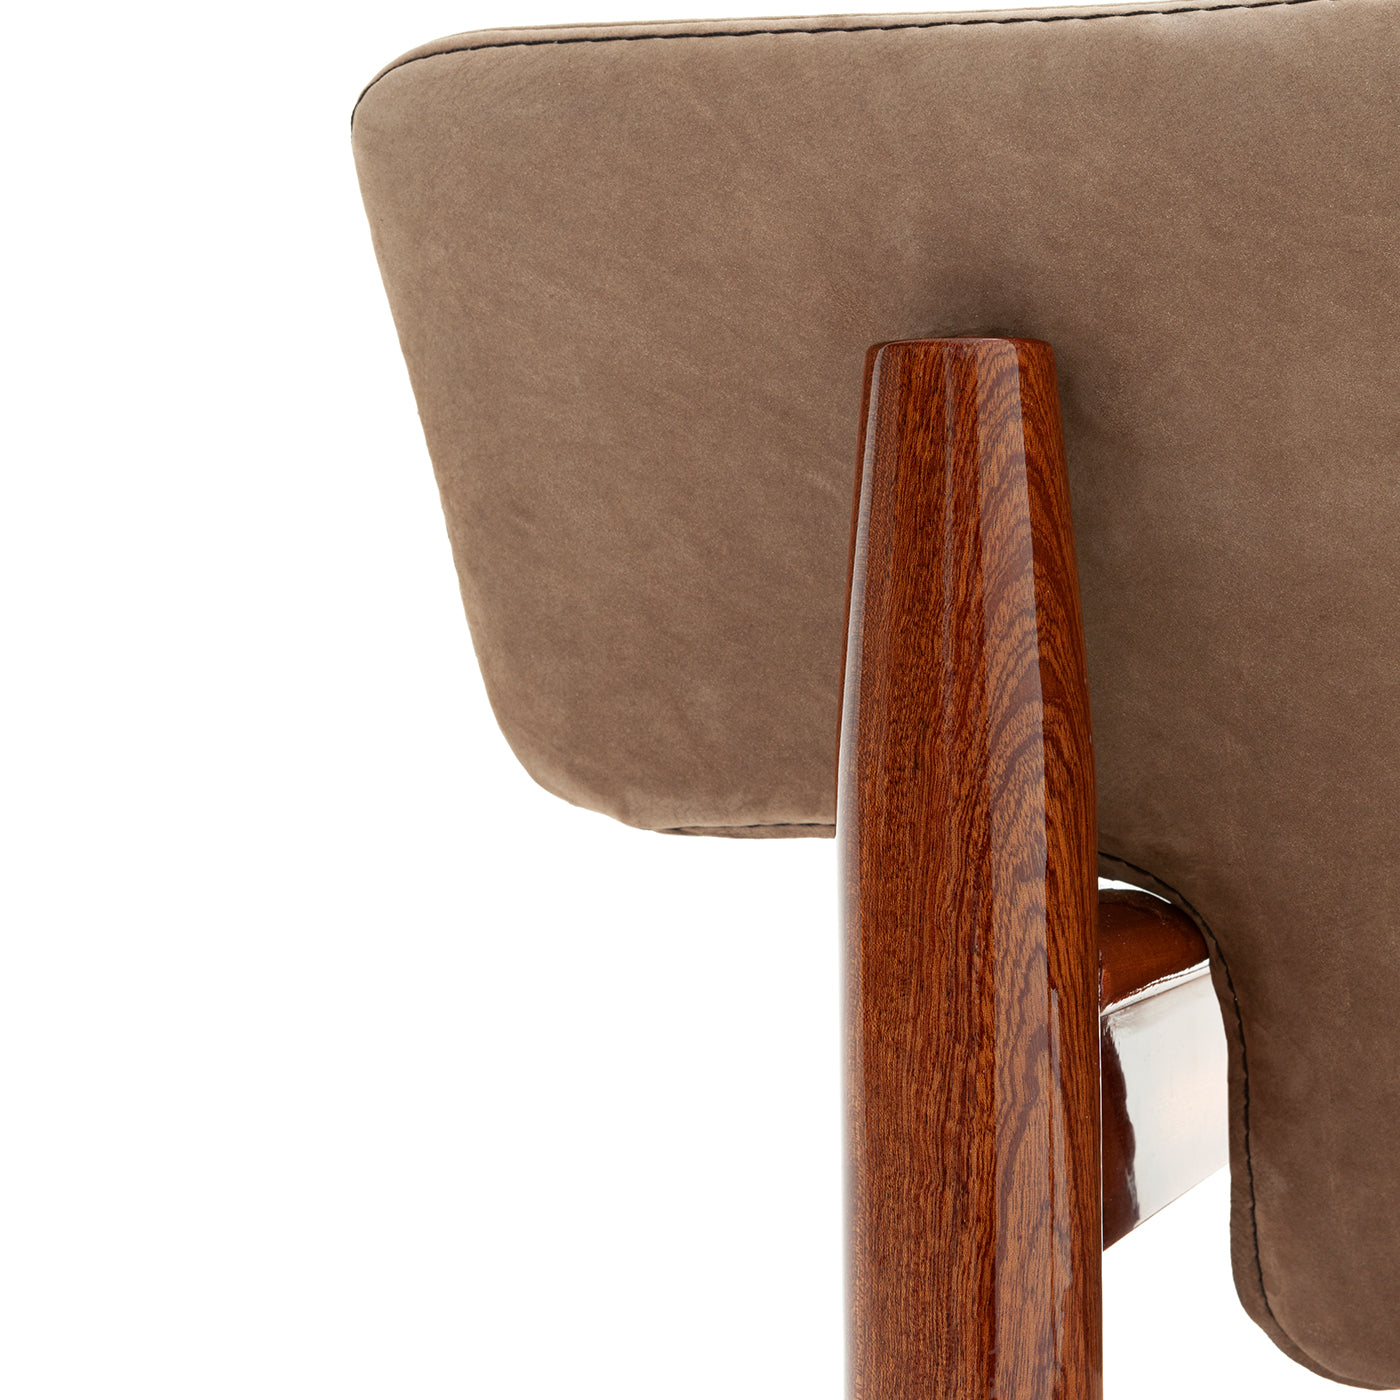 Vieste Large Brown Armchair by Massimo Castagna - Alternative view 1